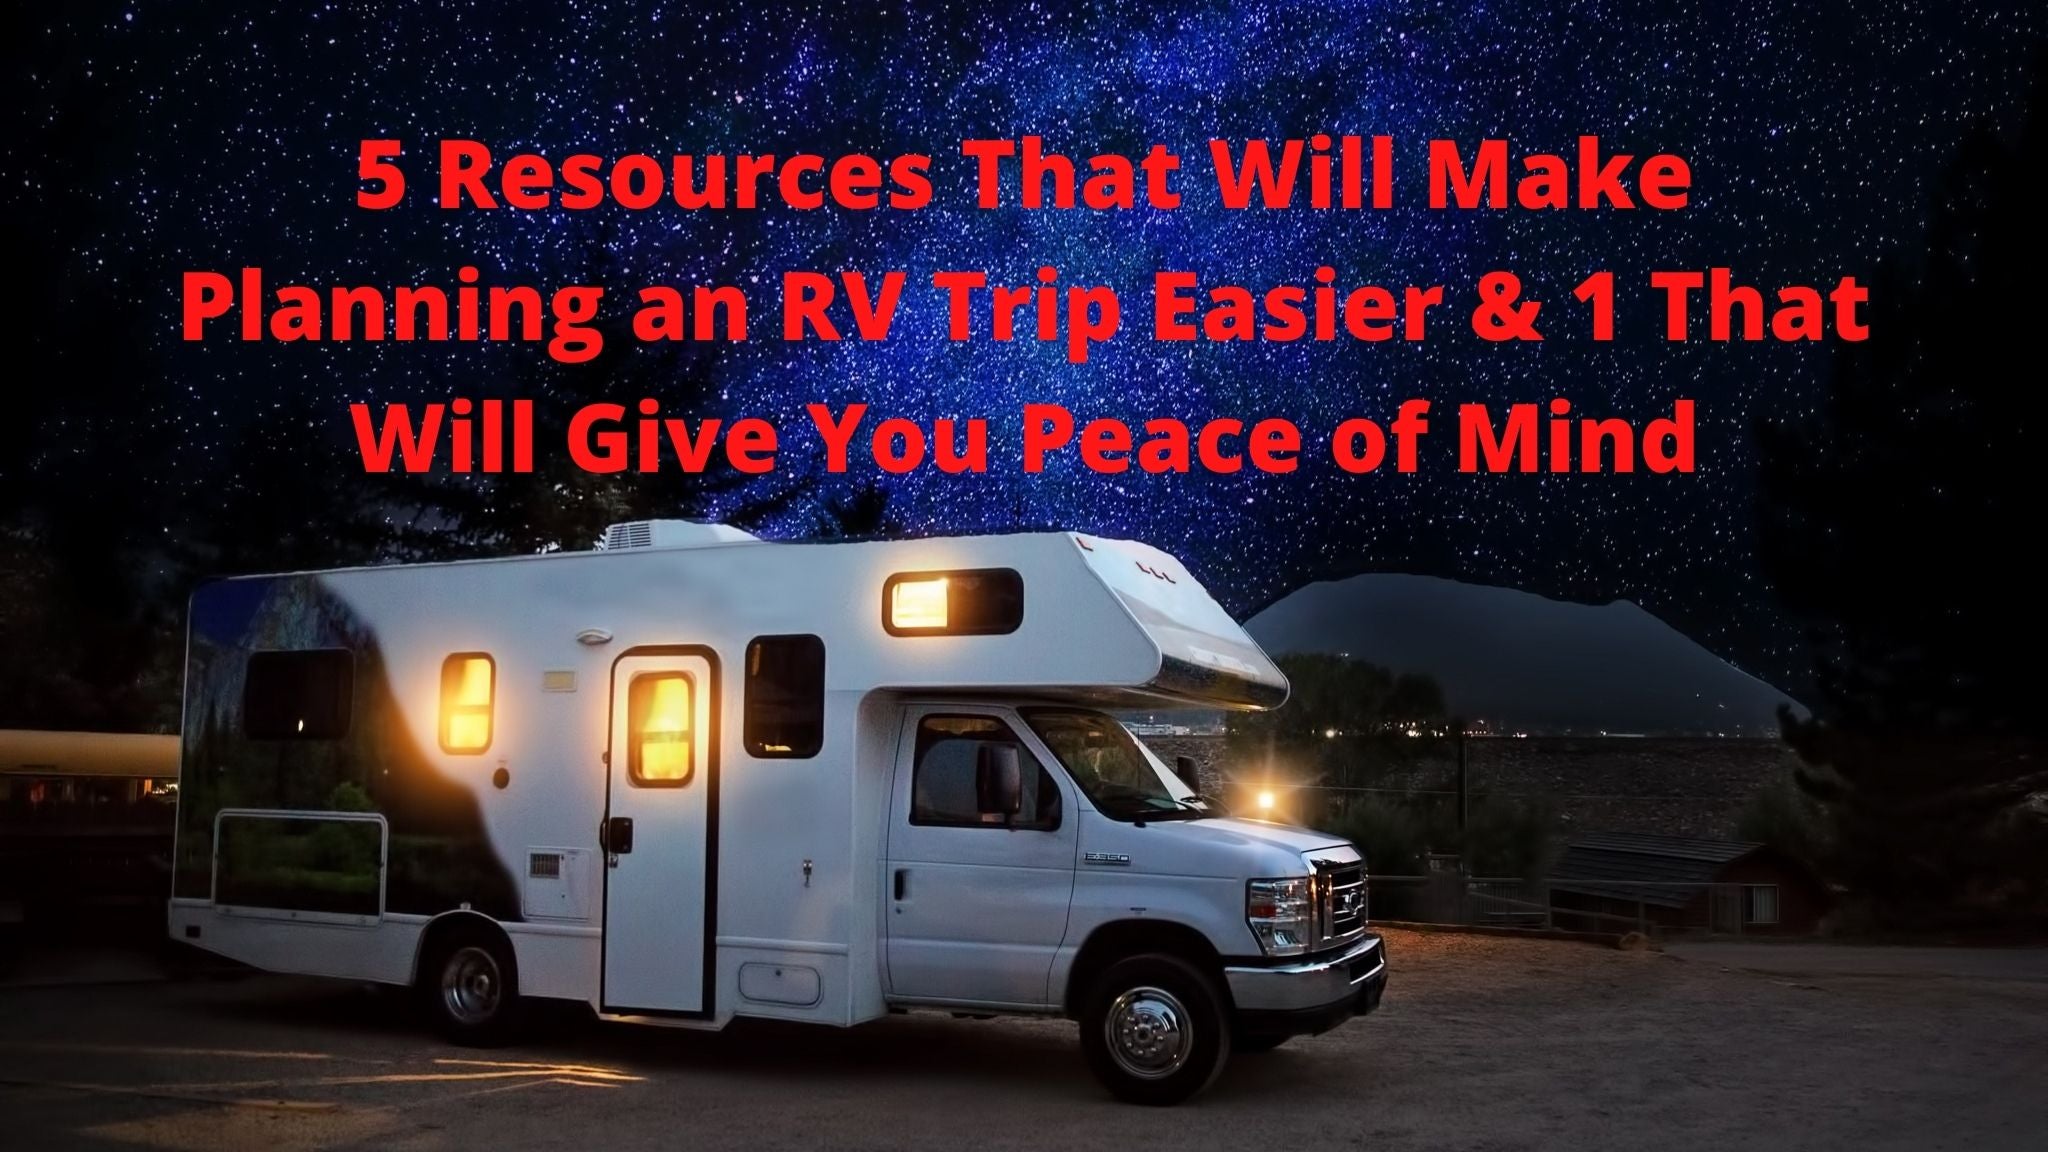 5 Resources That Will Make Planning an RV Trip Easier & 1 That Will Give You Peace of Mind